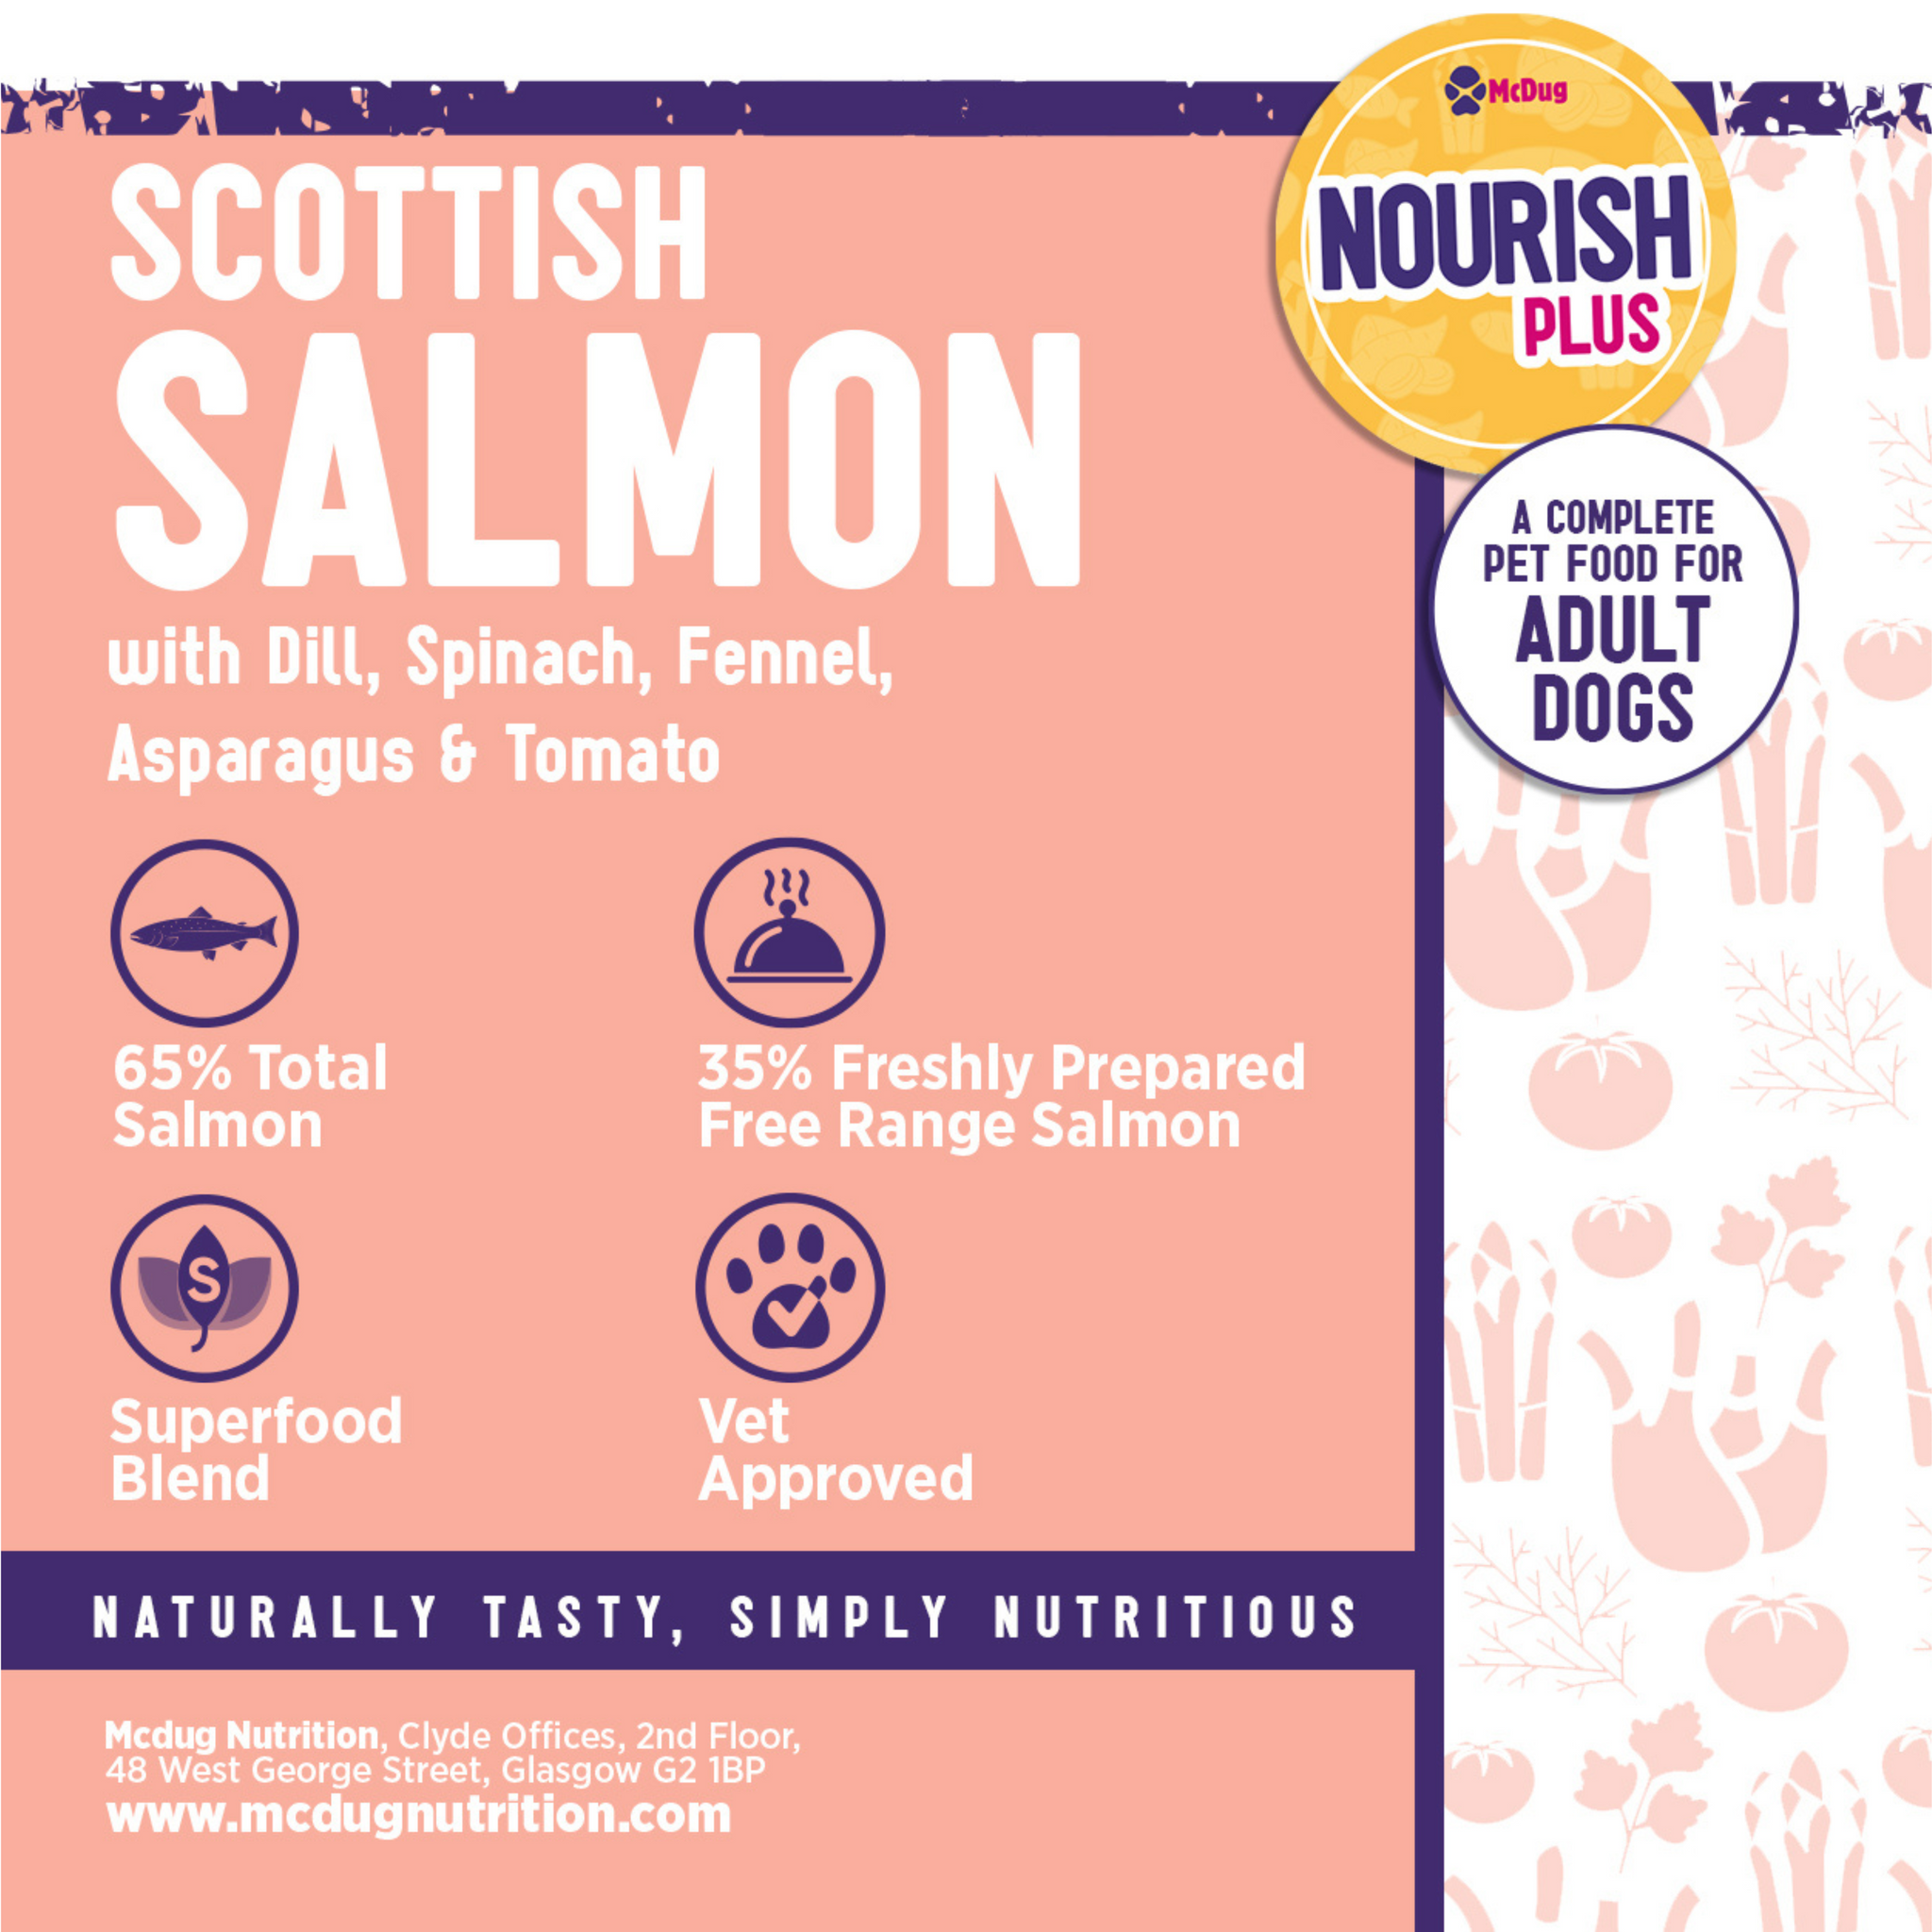 Nourish Plus Scottish  Salmon with Dill, Spinach, Fennel, Asparagus & Tomato (Adult Dog)